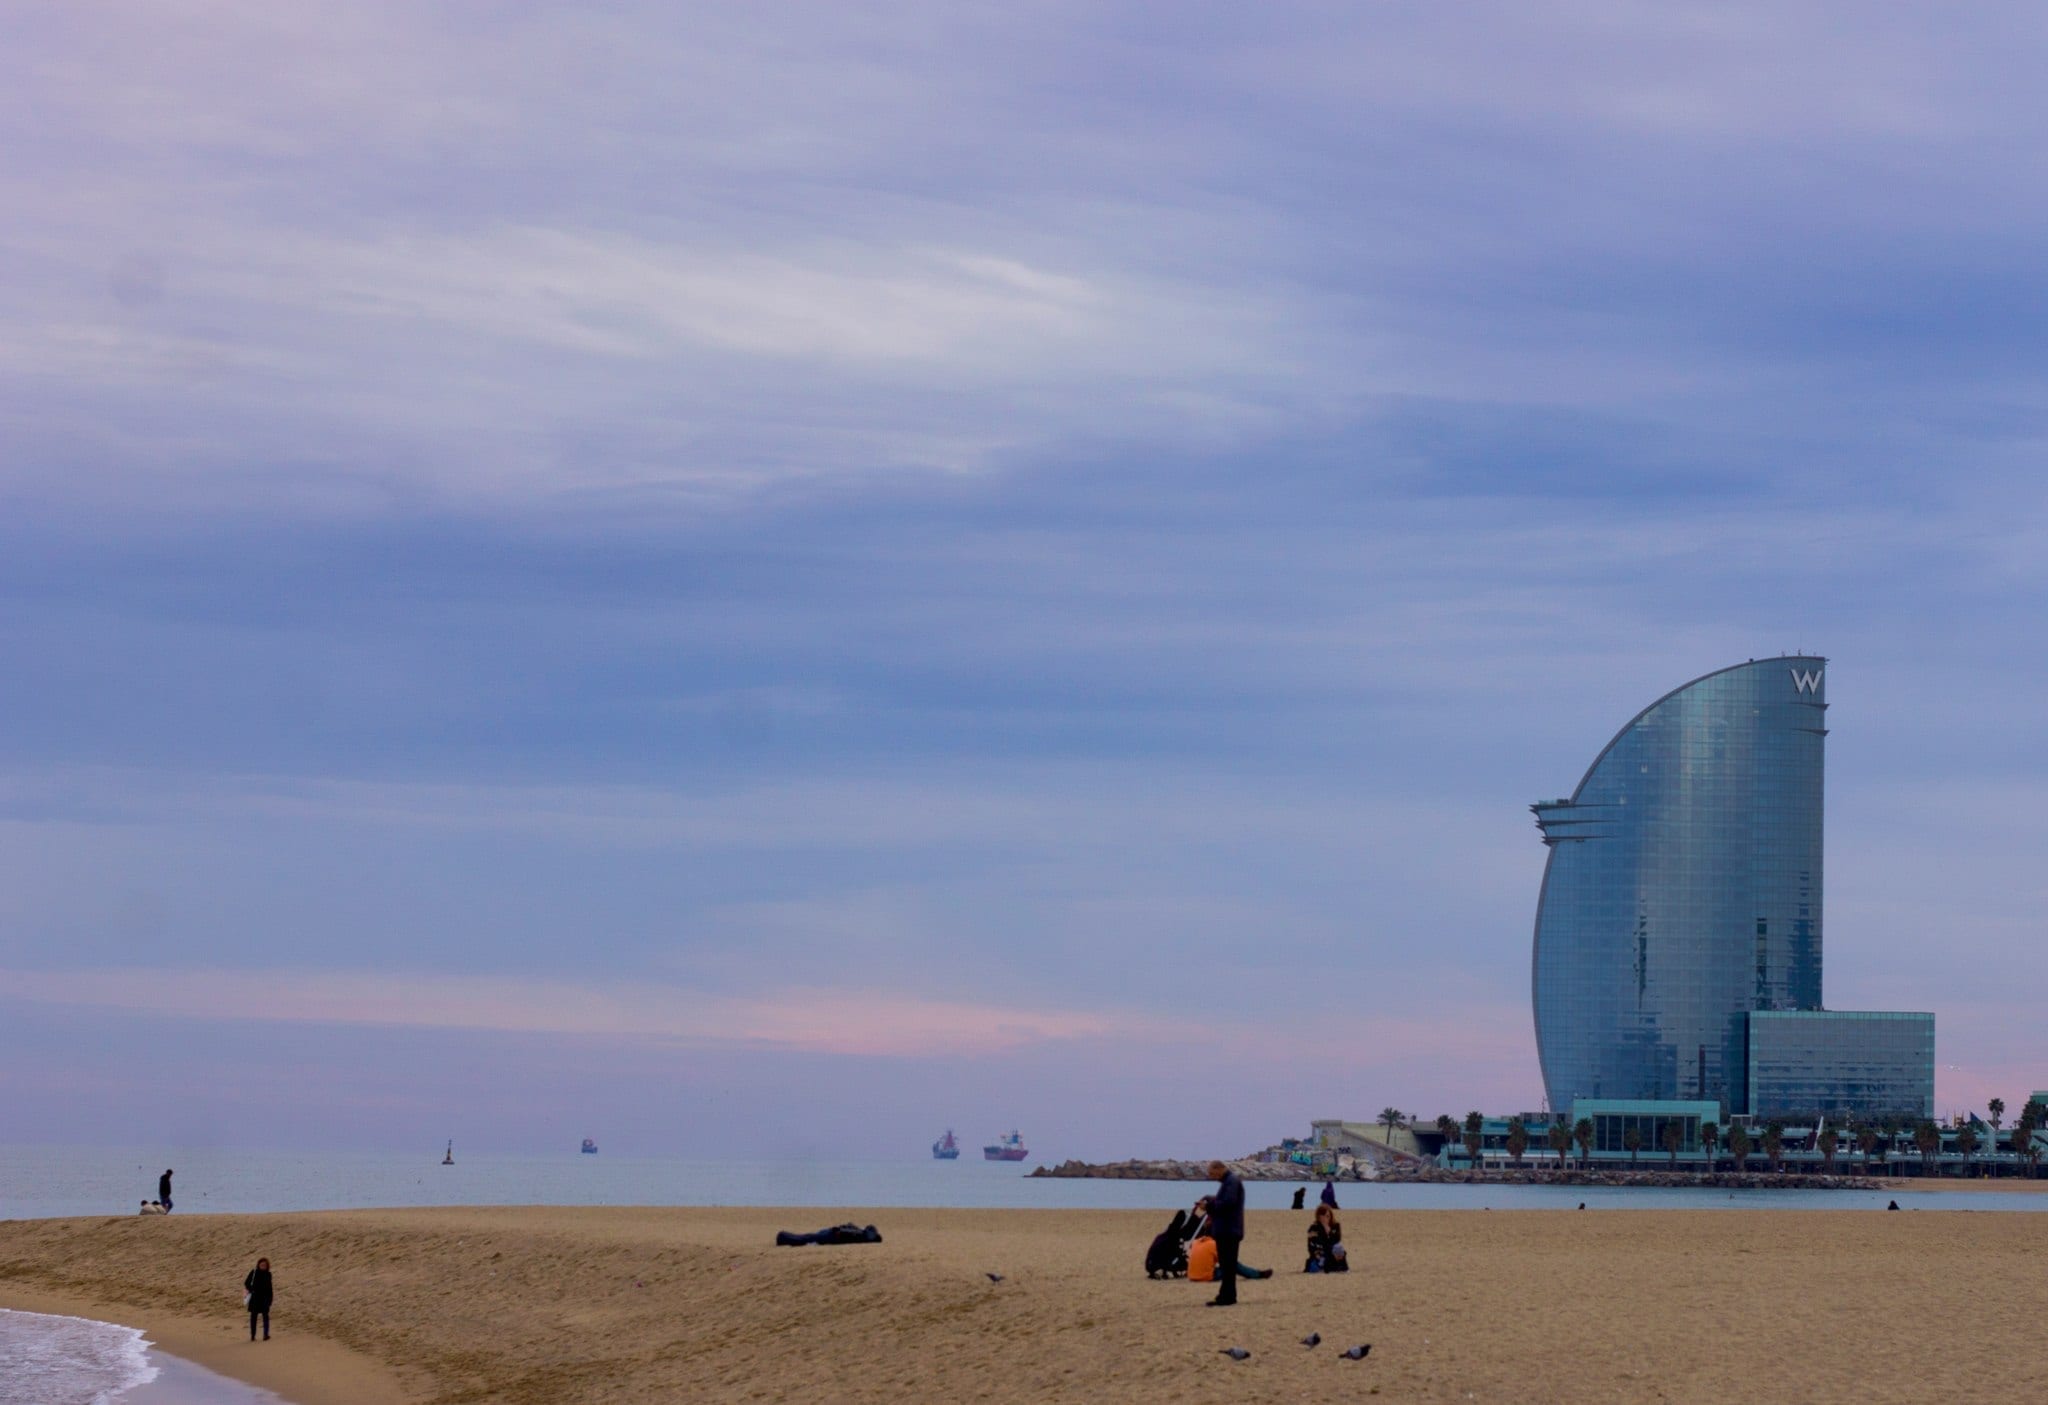 A few people on the beach with the W Barcelona in the background